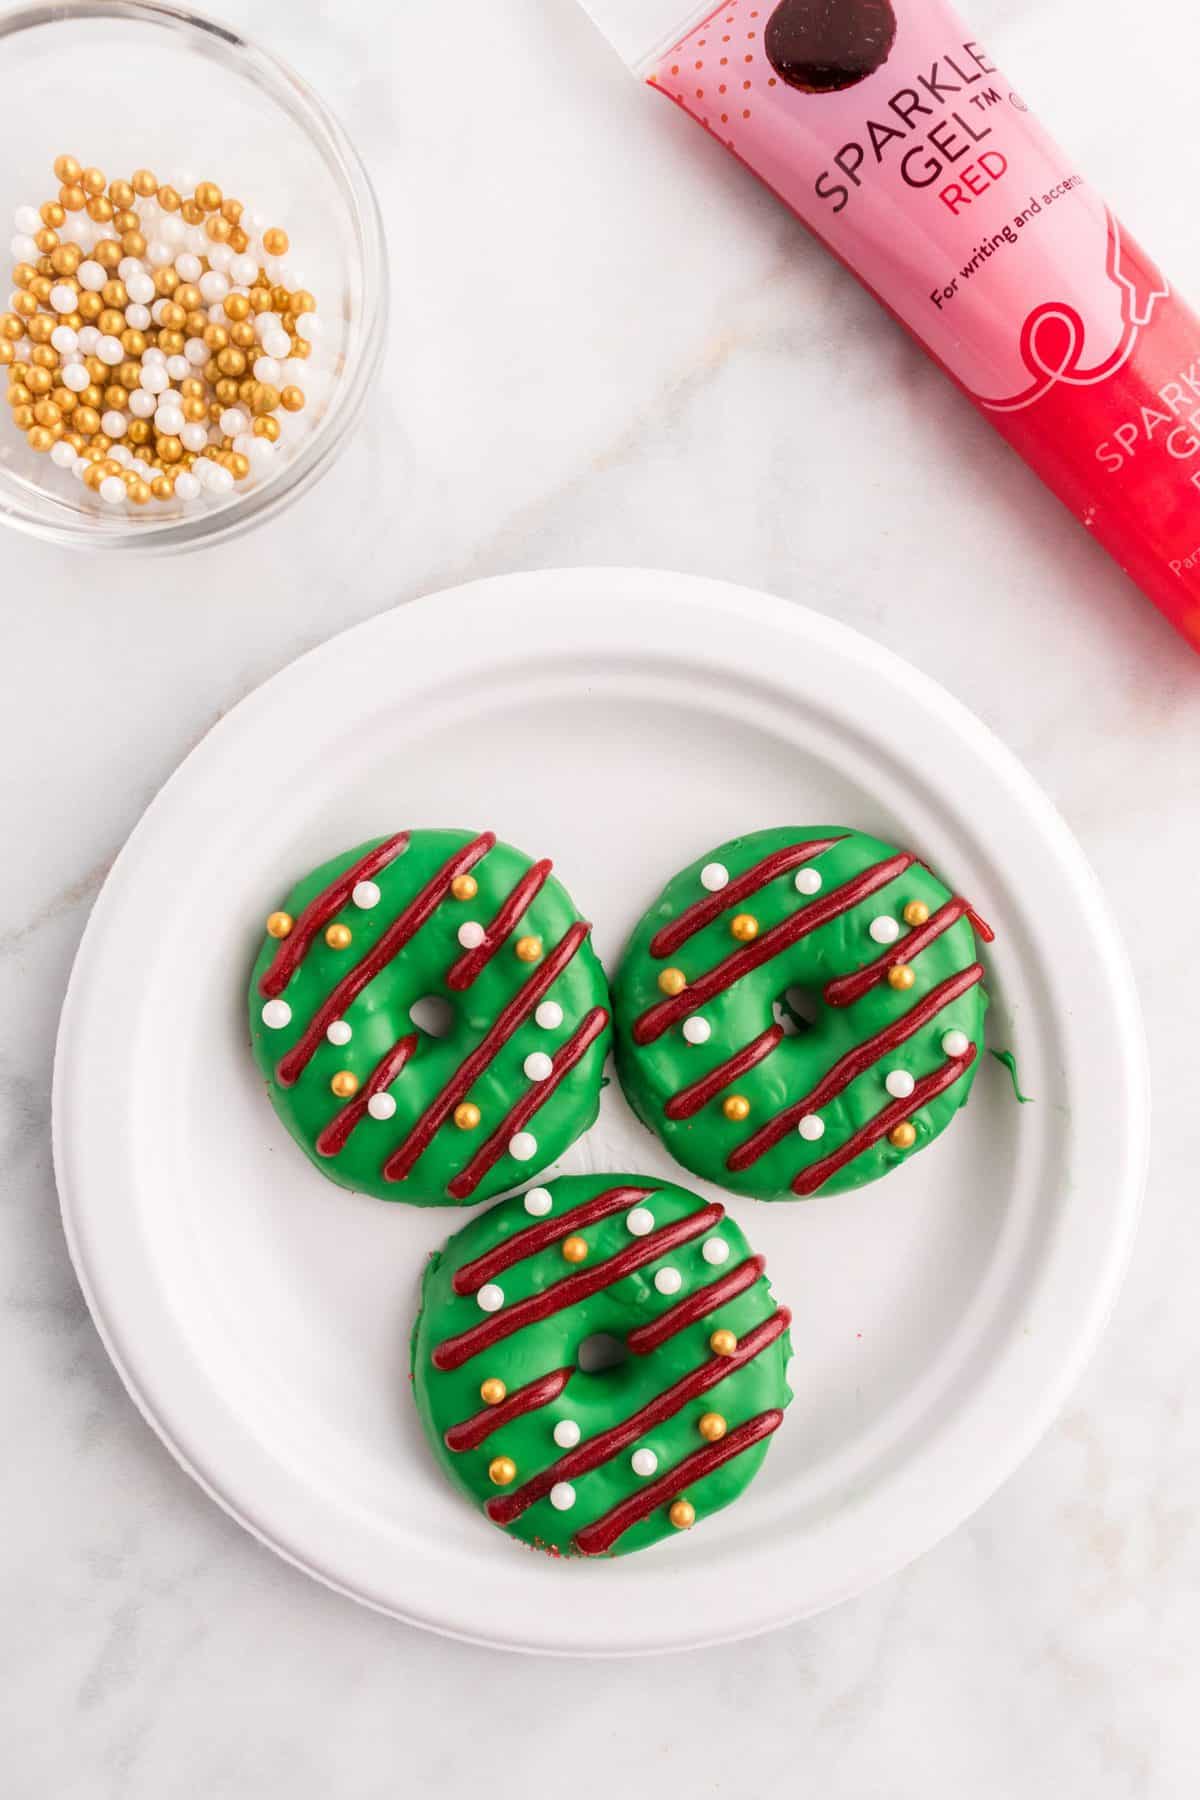 green Christmas wreath cookies with stripes and pearl sprinkles